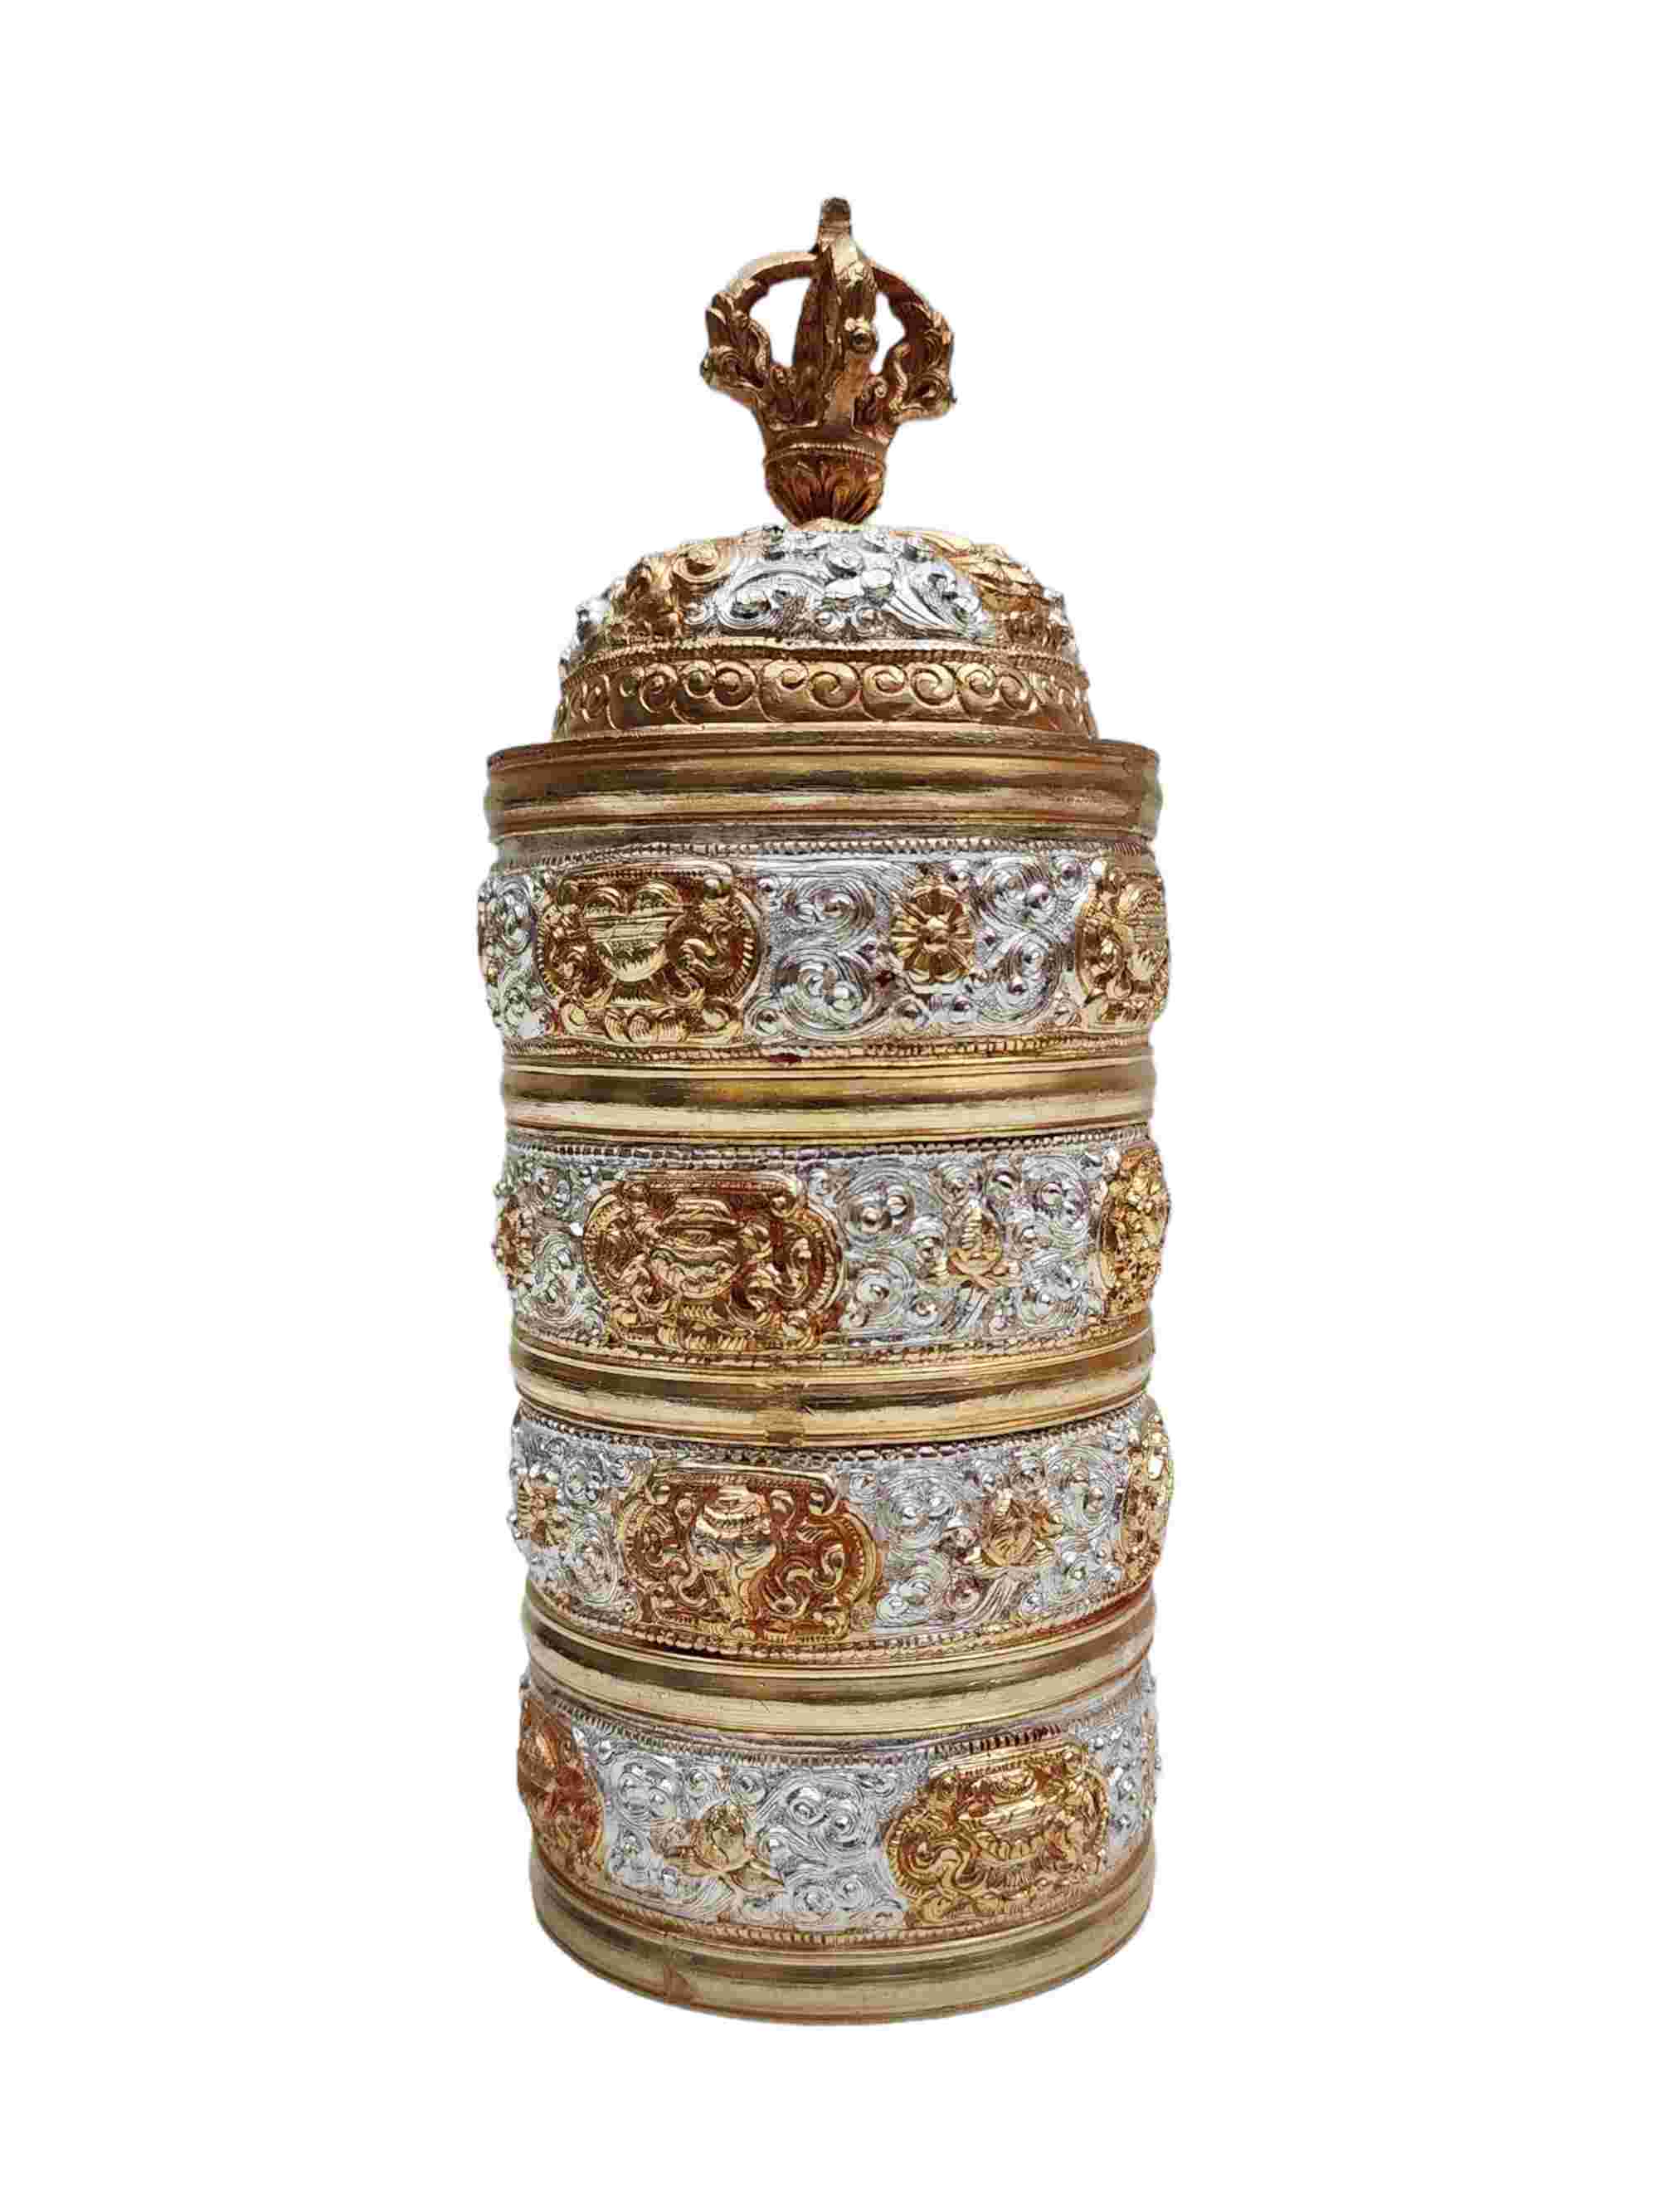 Buddhist Handmade Tibetan Offering, partly Gold Plated, Silver Plated